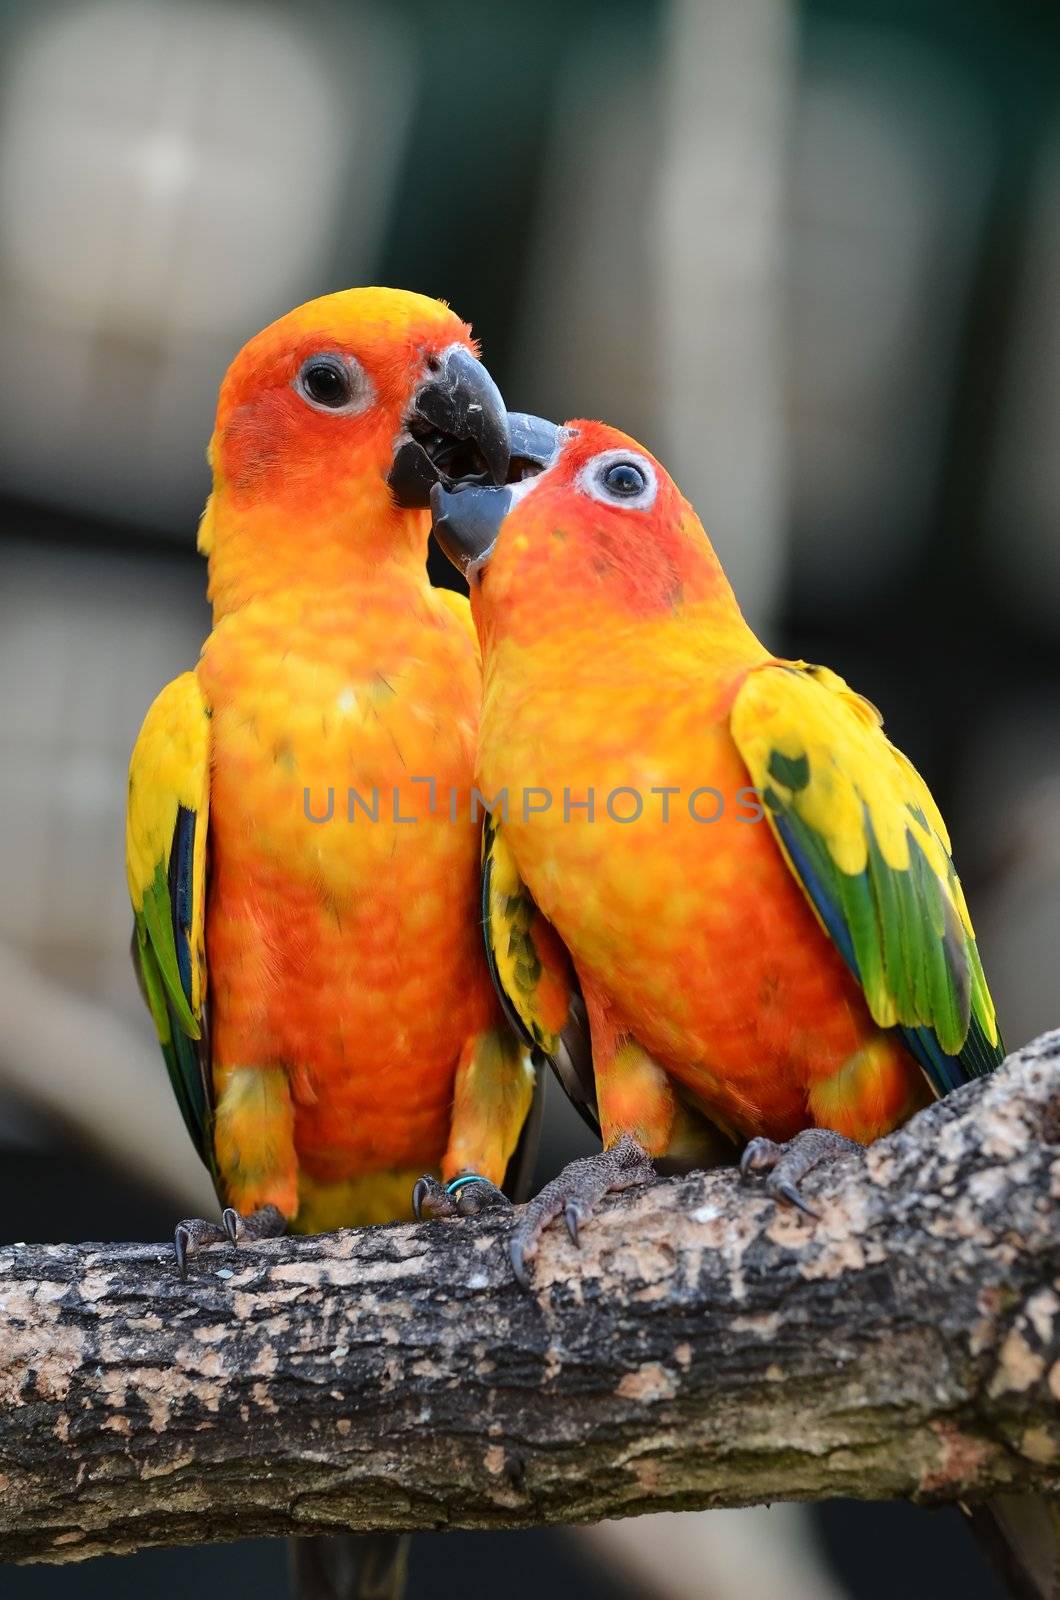 Sun Conure Parrot on a Tree Branch 